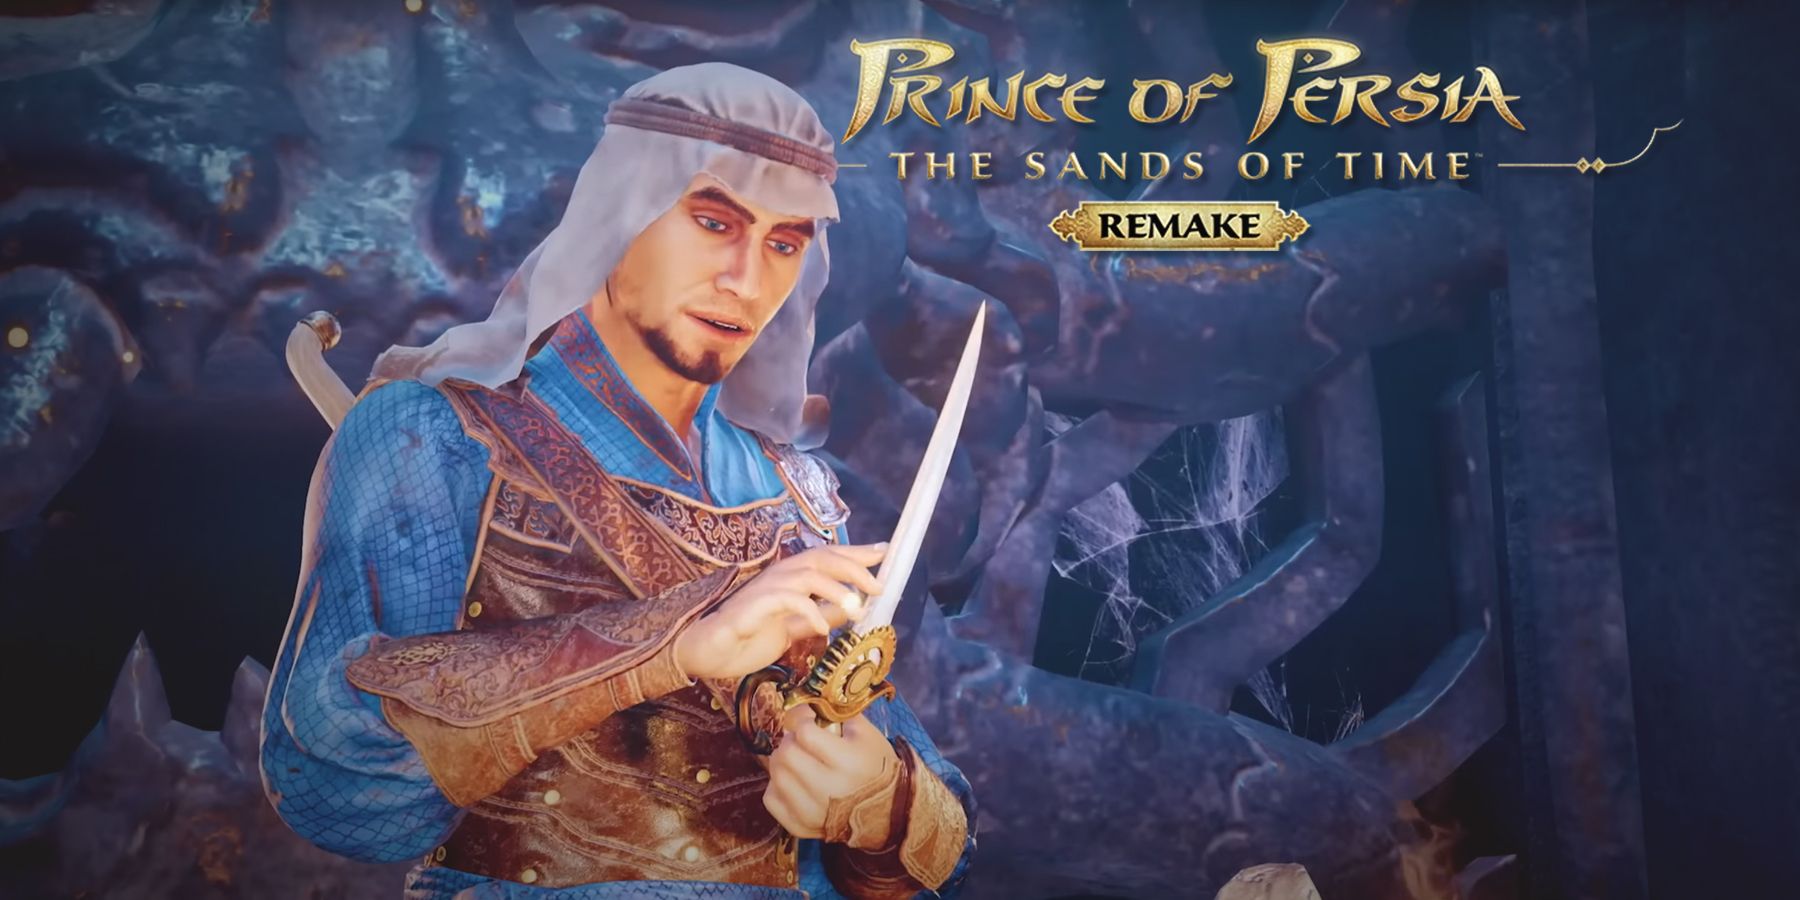 Prince of Persia The Sands of Time Remake prince holding dagger of time intro screenshot with game logo